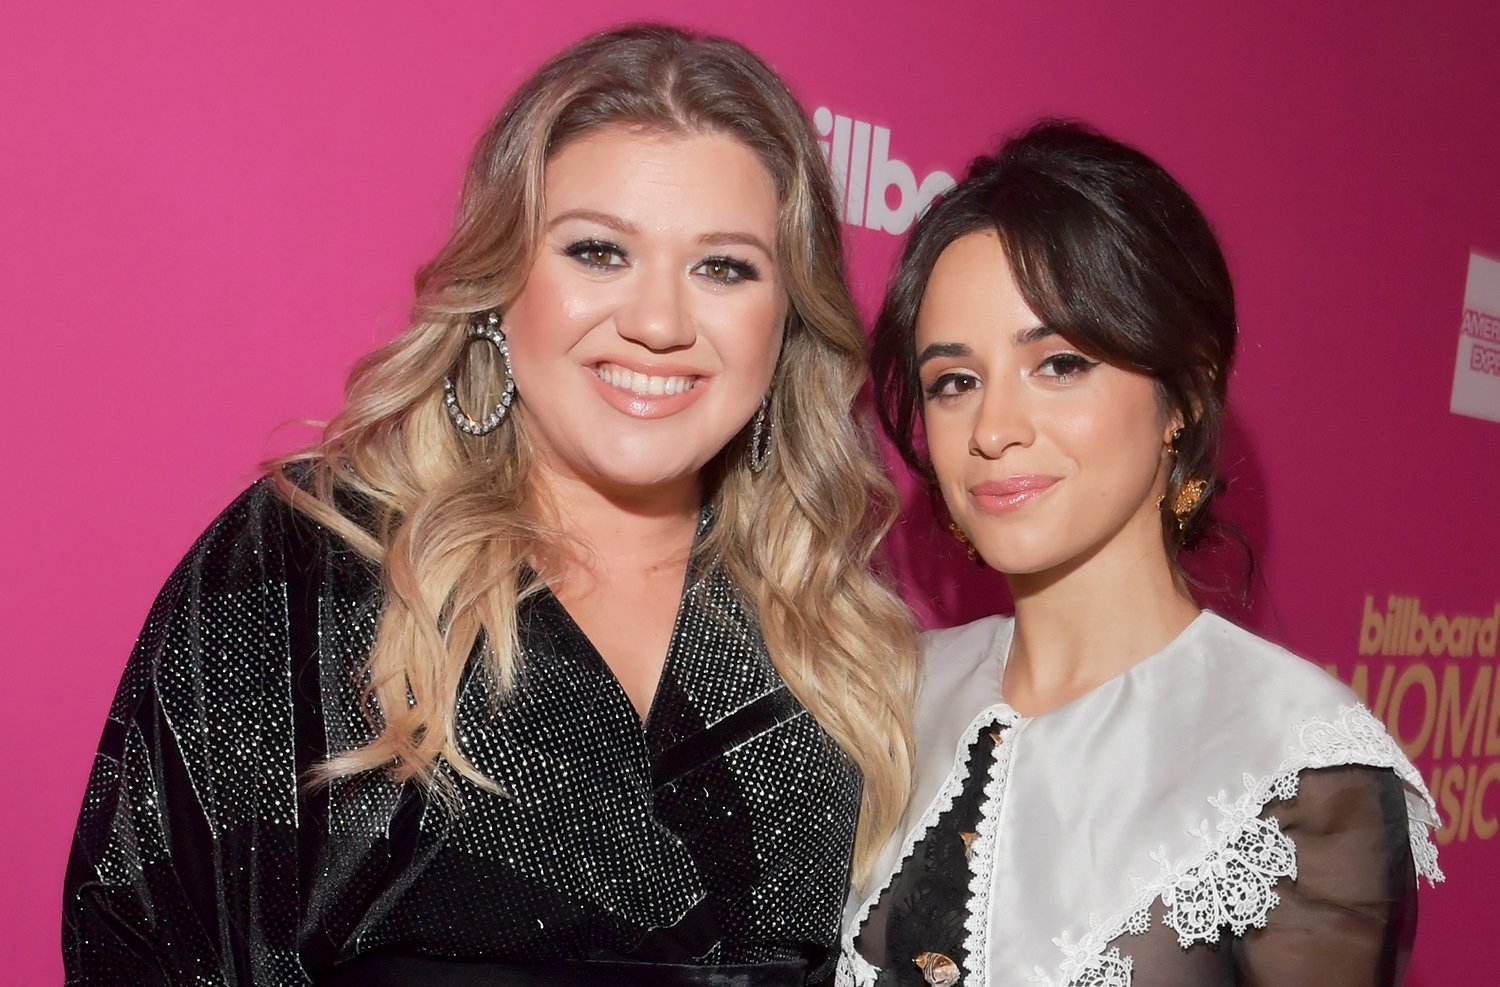 The Voice coach Kelly Clarkson and her season 22 replacement, Camila Cabello, pose together at Billboard Women in Music 2017.